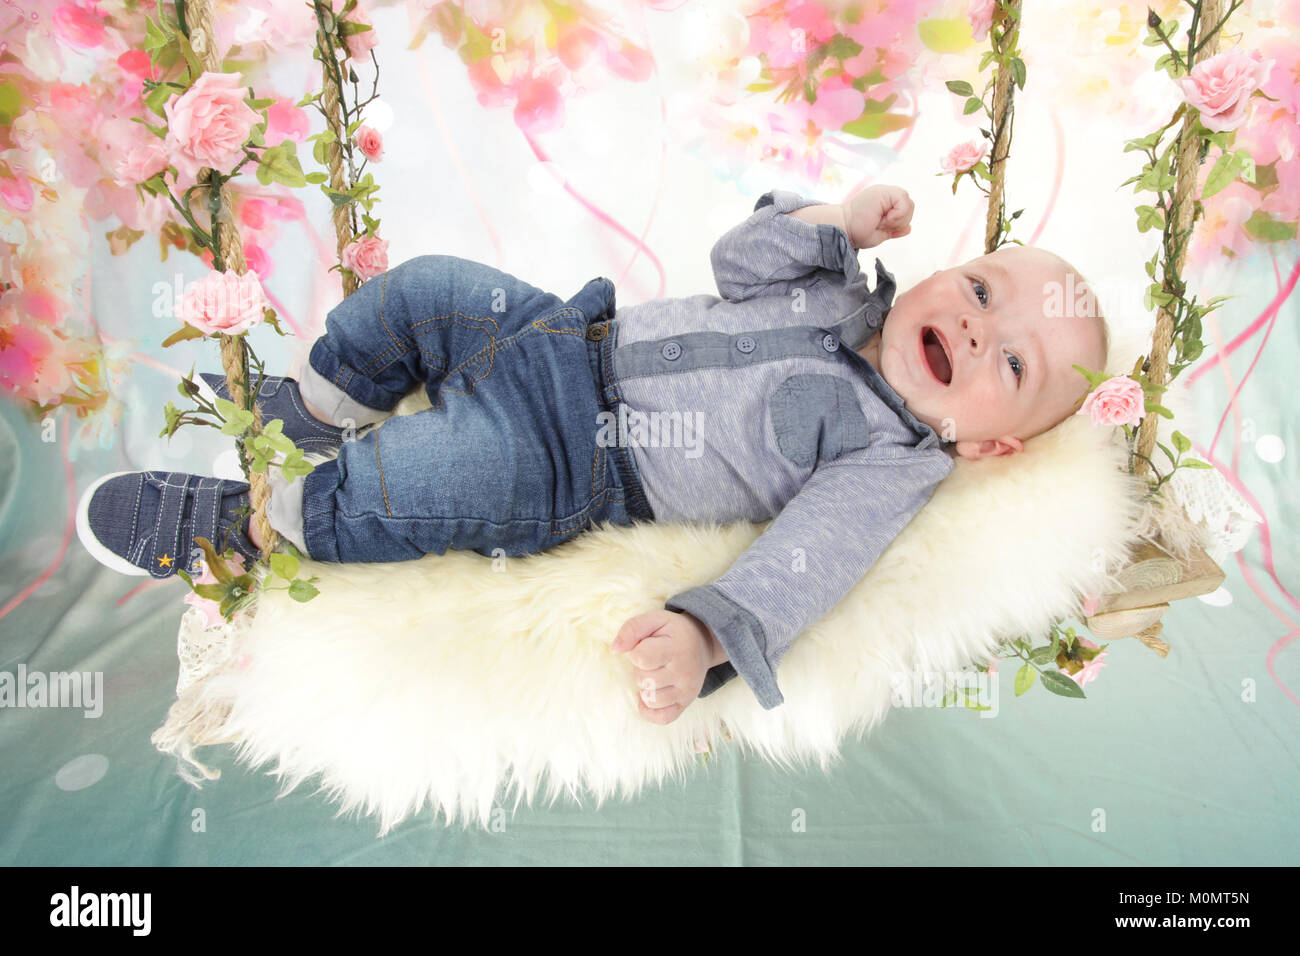 Baby Boy laughing on toy swing Banque D'Images